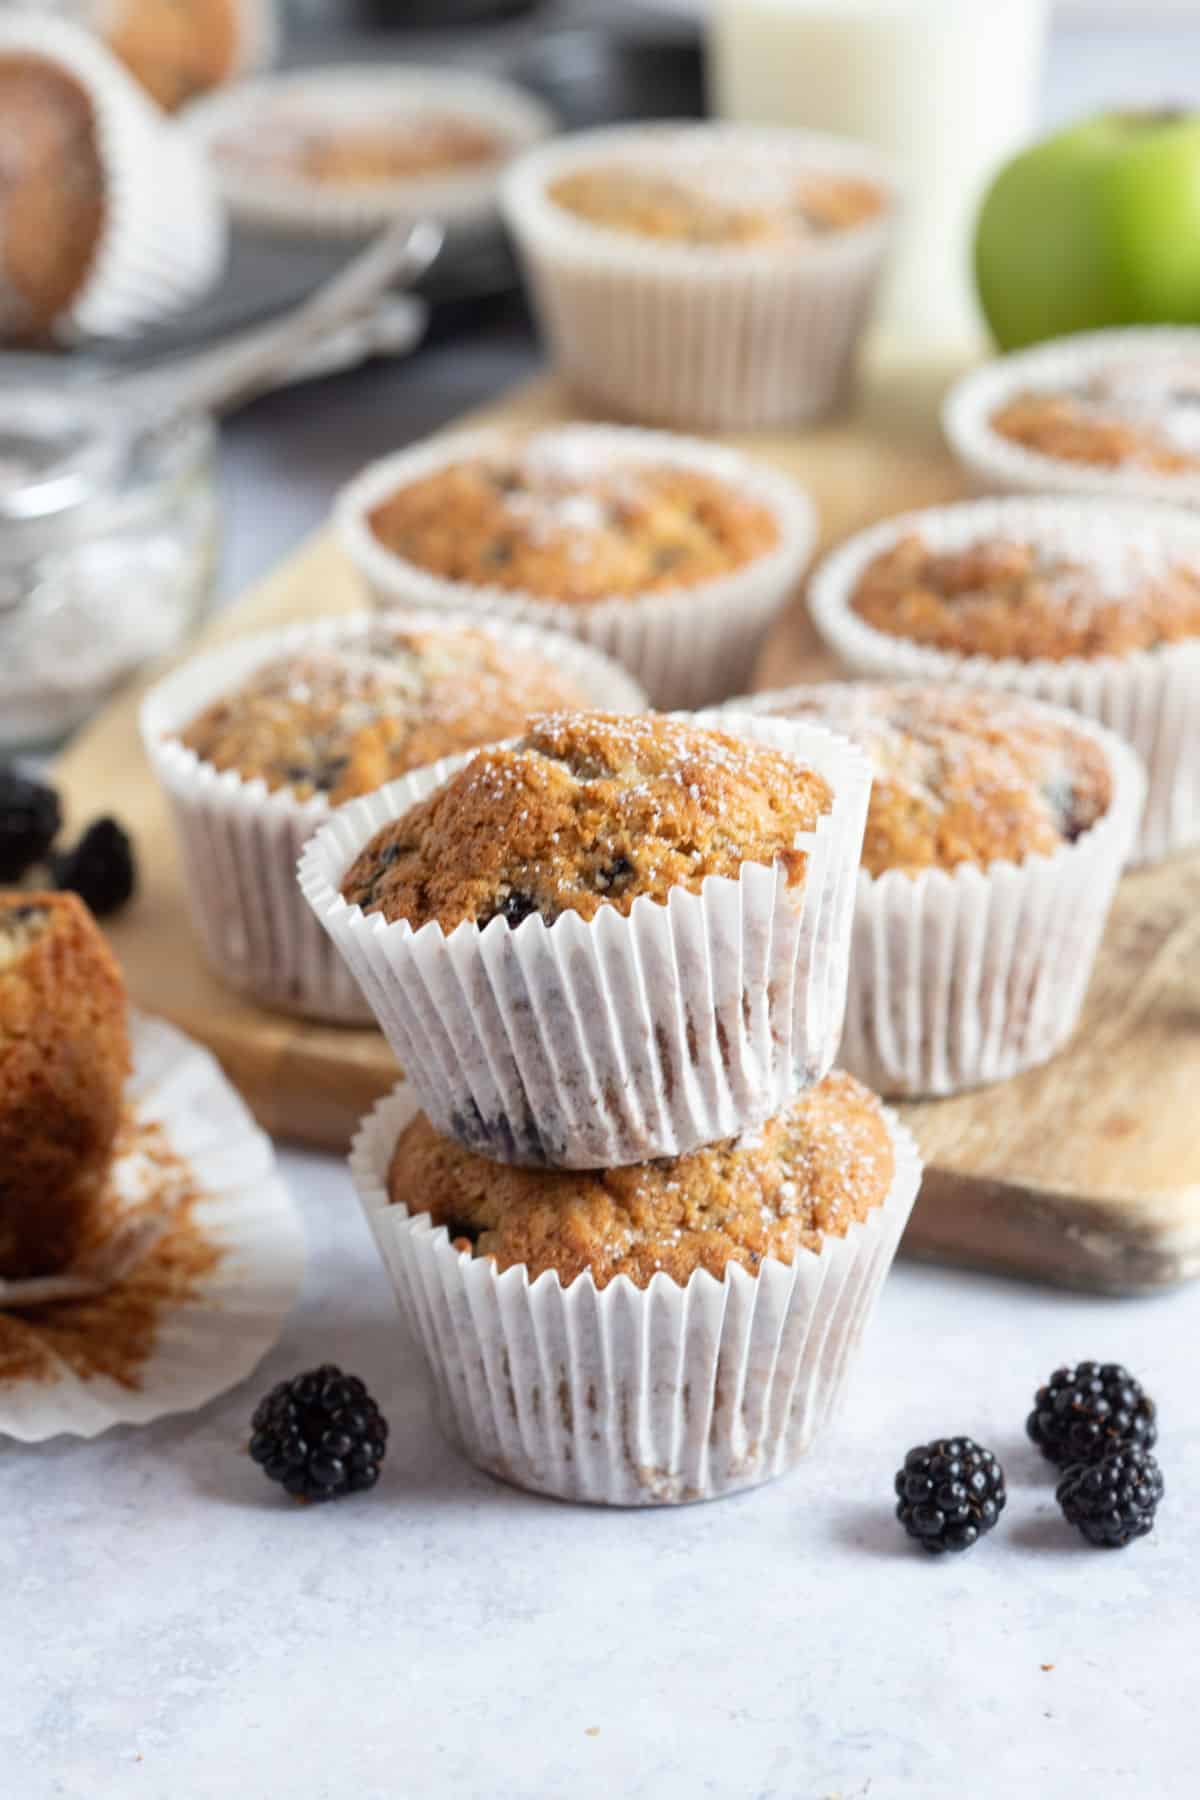 Two apple and blackberry muffins stacked on top of each other.